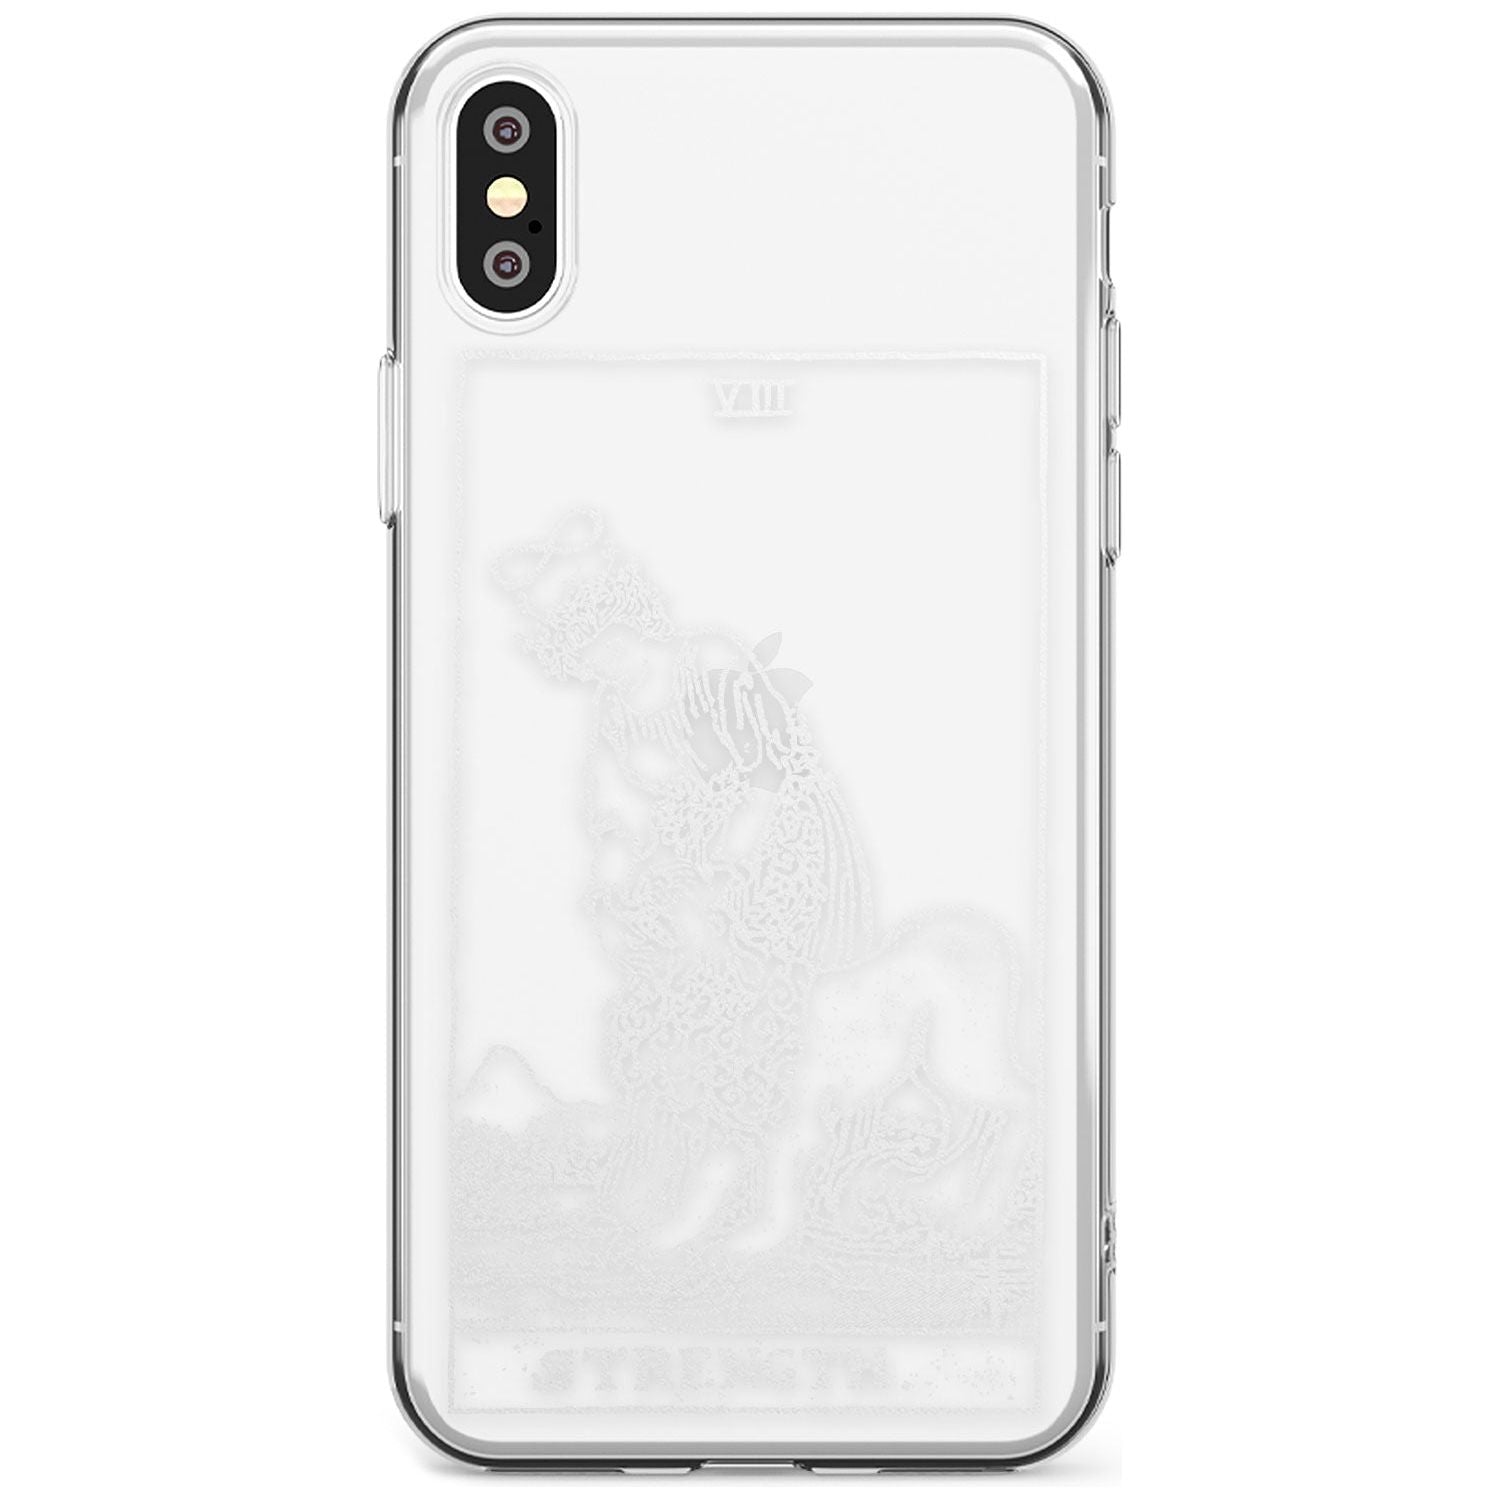 Strength Tarot Card - White Transparent Black Impact Phone Case for iPhone X XS Max XR